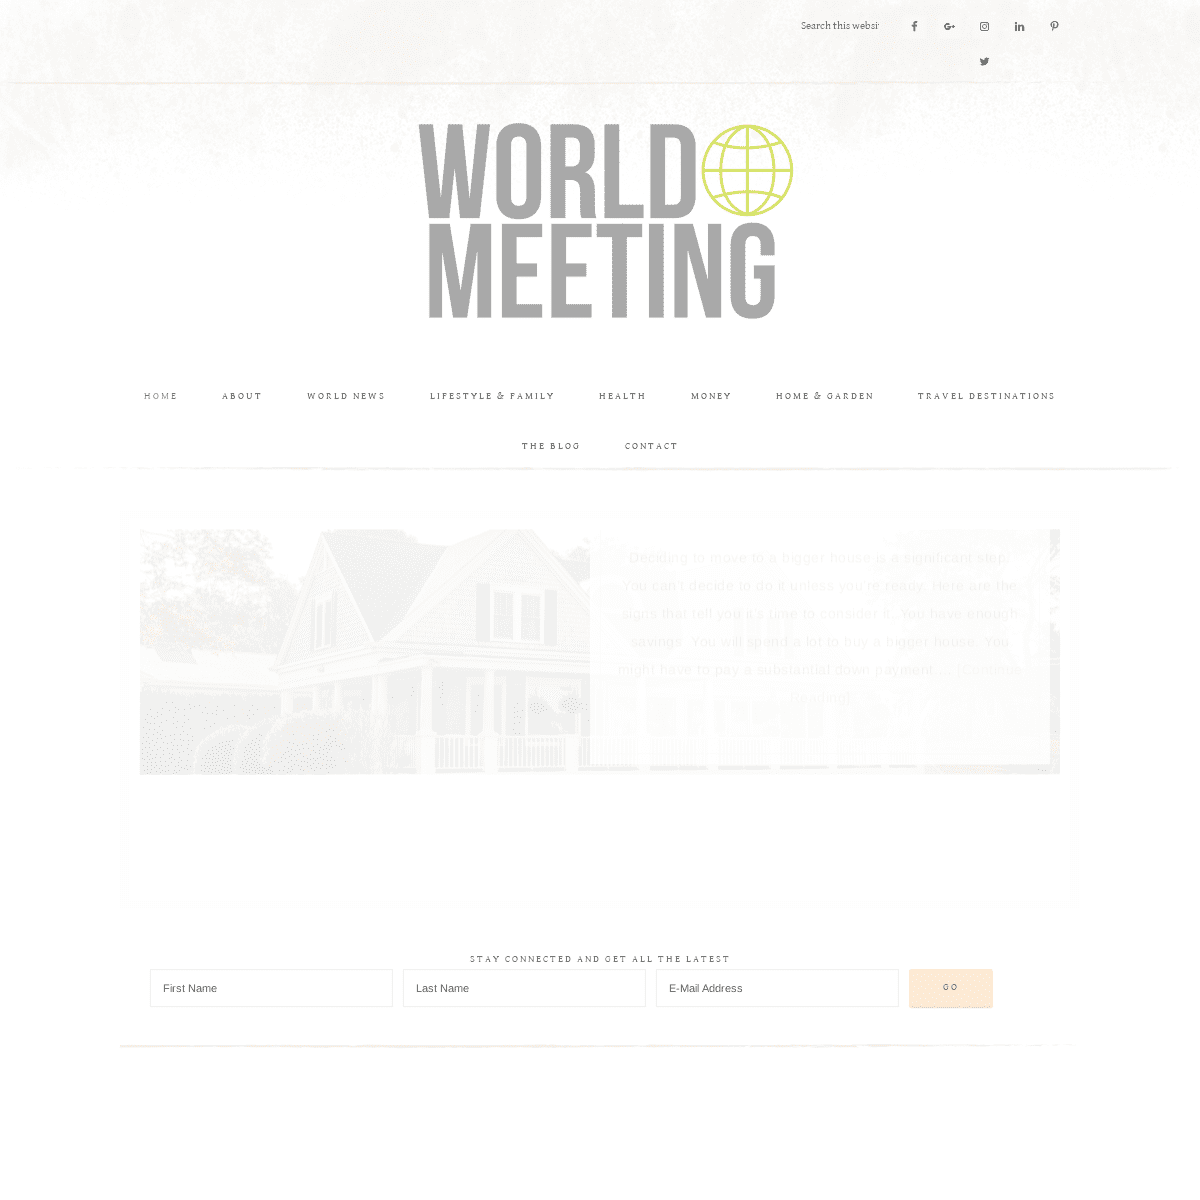 A complete backup of https://worldmeeting2015.org